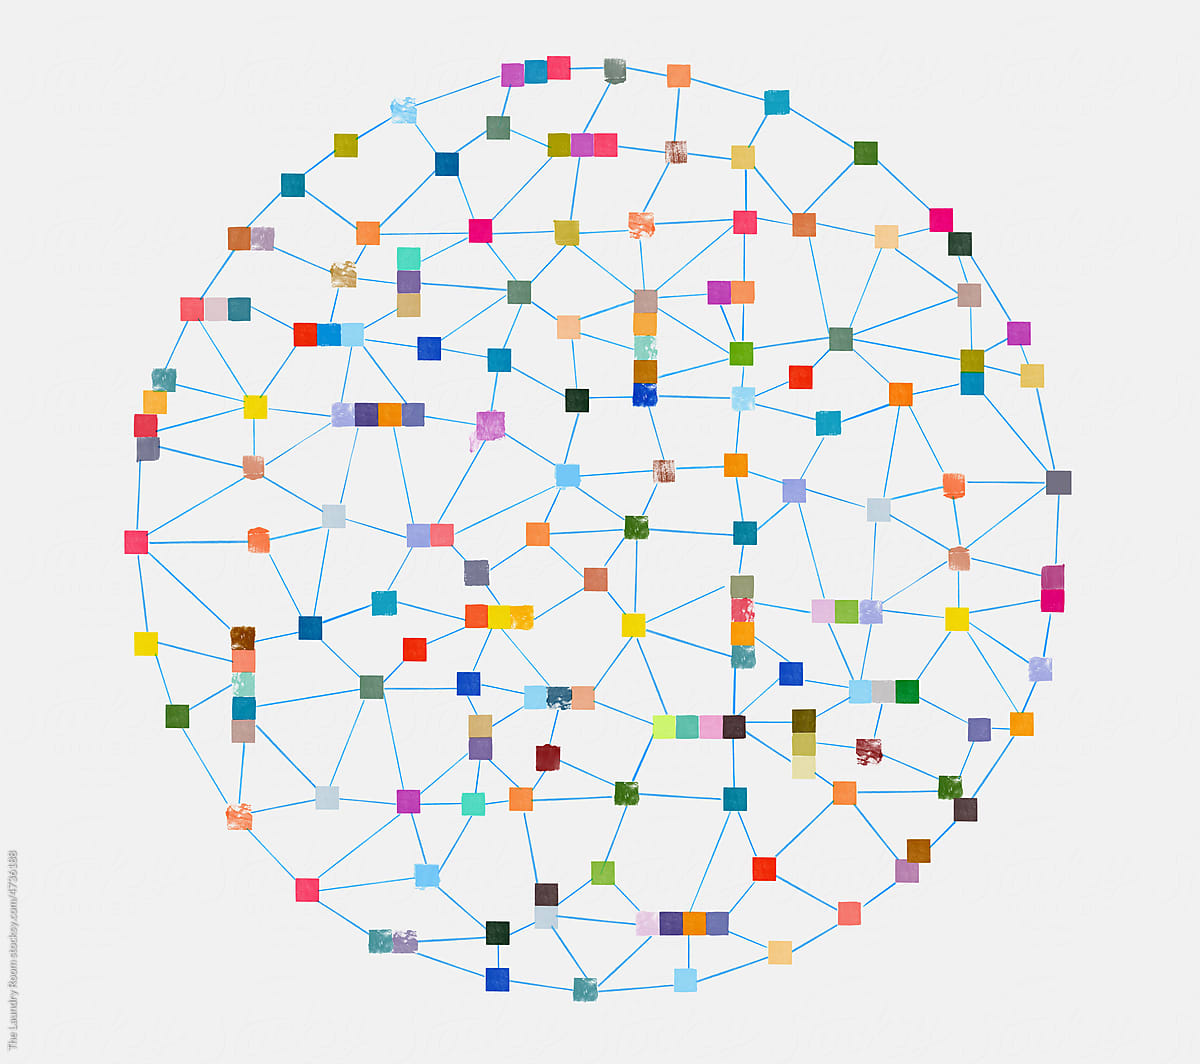 Global Network with Colorful Ink Square Connection Points